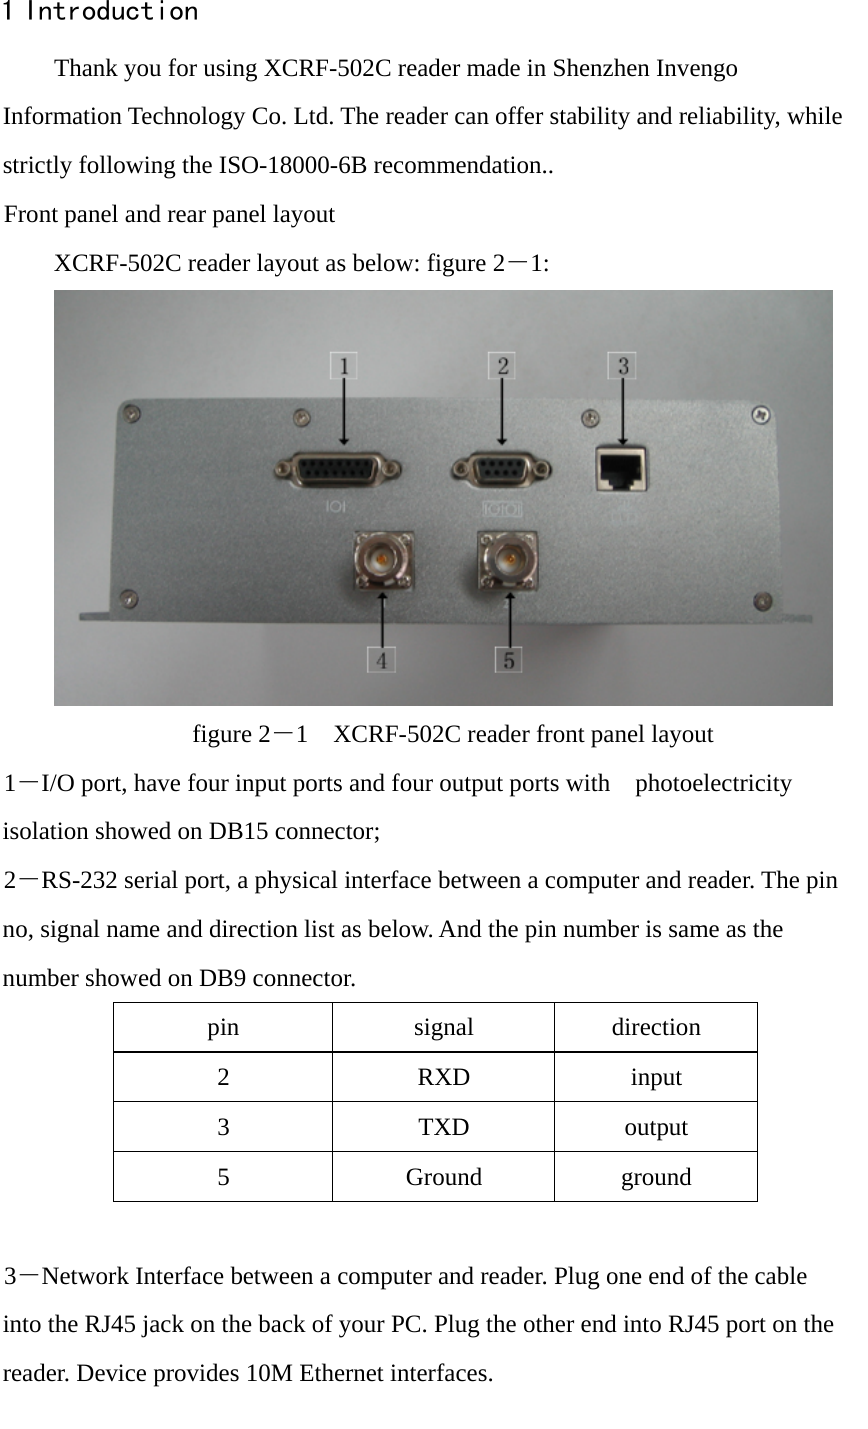                                                                                                                                                1 Introduction Thank you for using XCRF-502C reader made in Shenzhen Invengo Information Technology Co. Ltd. The reader can offer stability and reliability, while strictly following the ISO-18000-6B recommendation.. Front panel and rear panel layout XCRF-502C reader layout as below: figure 2－1:  figure 2－1    XCRF-502C reader front panel layout 1－I/O port, have four input ports and four output ports with  photoelectricity  isolation showed on DB15 connector;   2－RS-232 serial port, a physical interface between a computer and reader. The pin no, signal name and direction list as below. And the pin number is same as the number showed on DB9 connector. pin signal direction 2 RXD input 3 TXD output 5 Ground ground  3－Network Interface between a computer and reader. Plug one end of the cable into the RJ45 jack on the back of your PC. Plug the other end into RJ45 port on the reader. Device provides 10M Ethernet interfaces. 